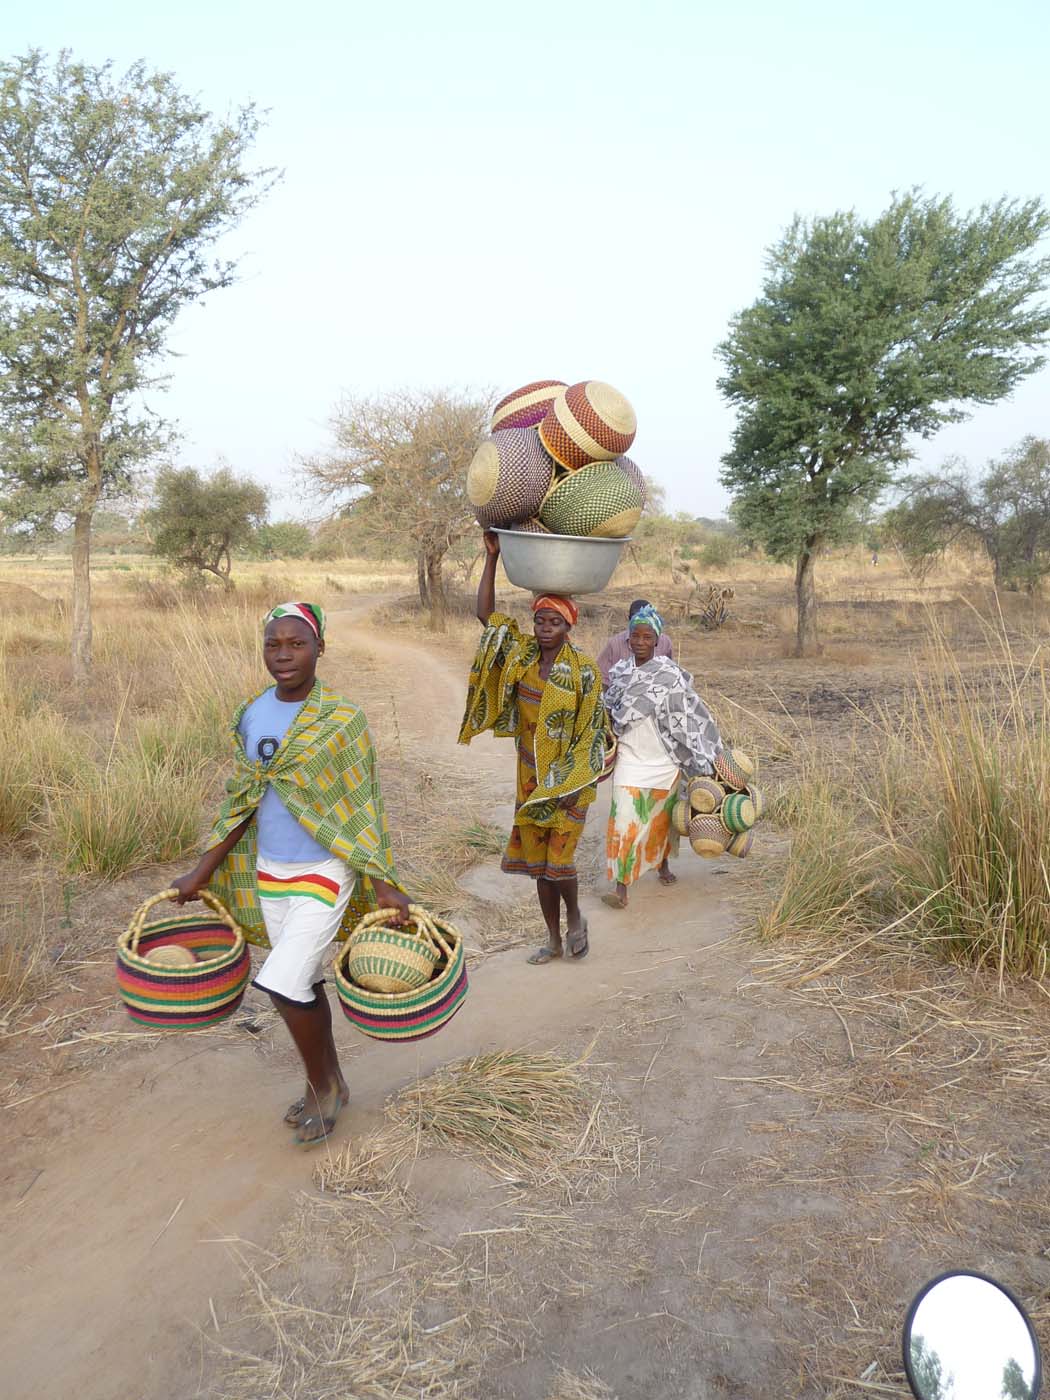 Women often carry baskets for other women in the village